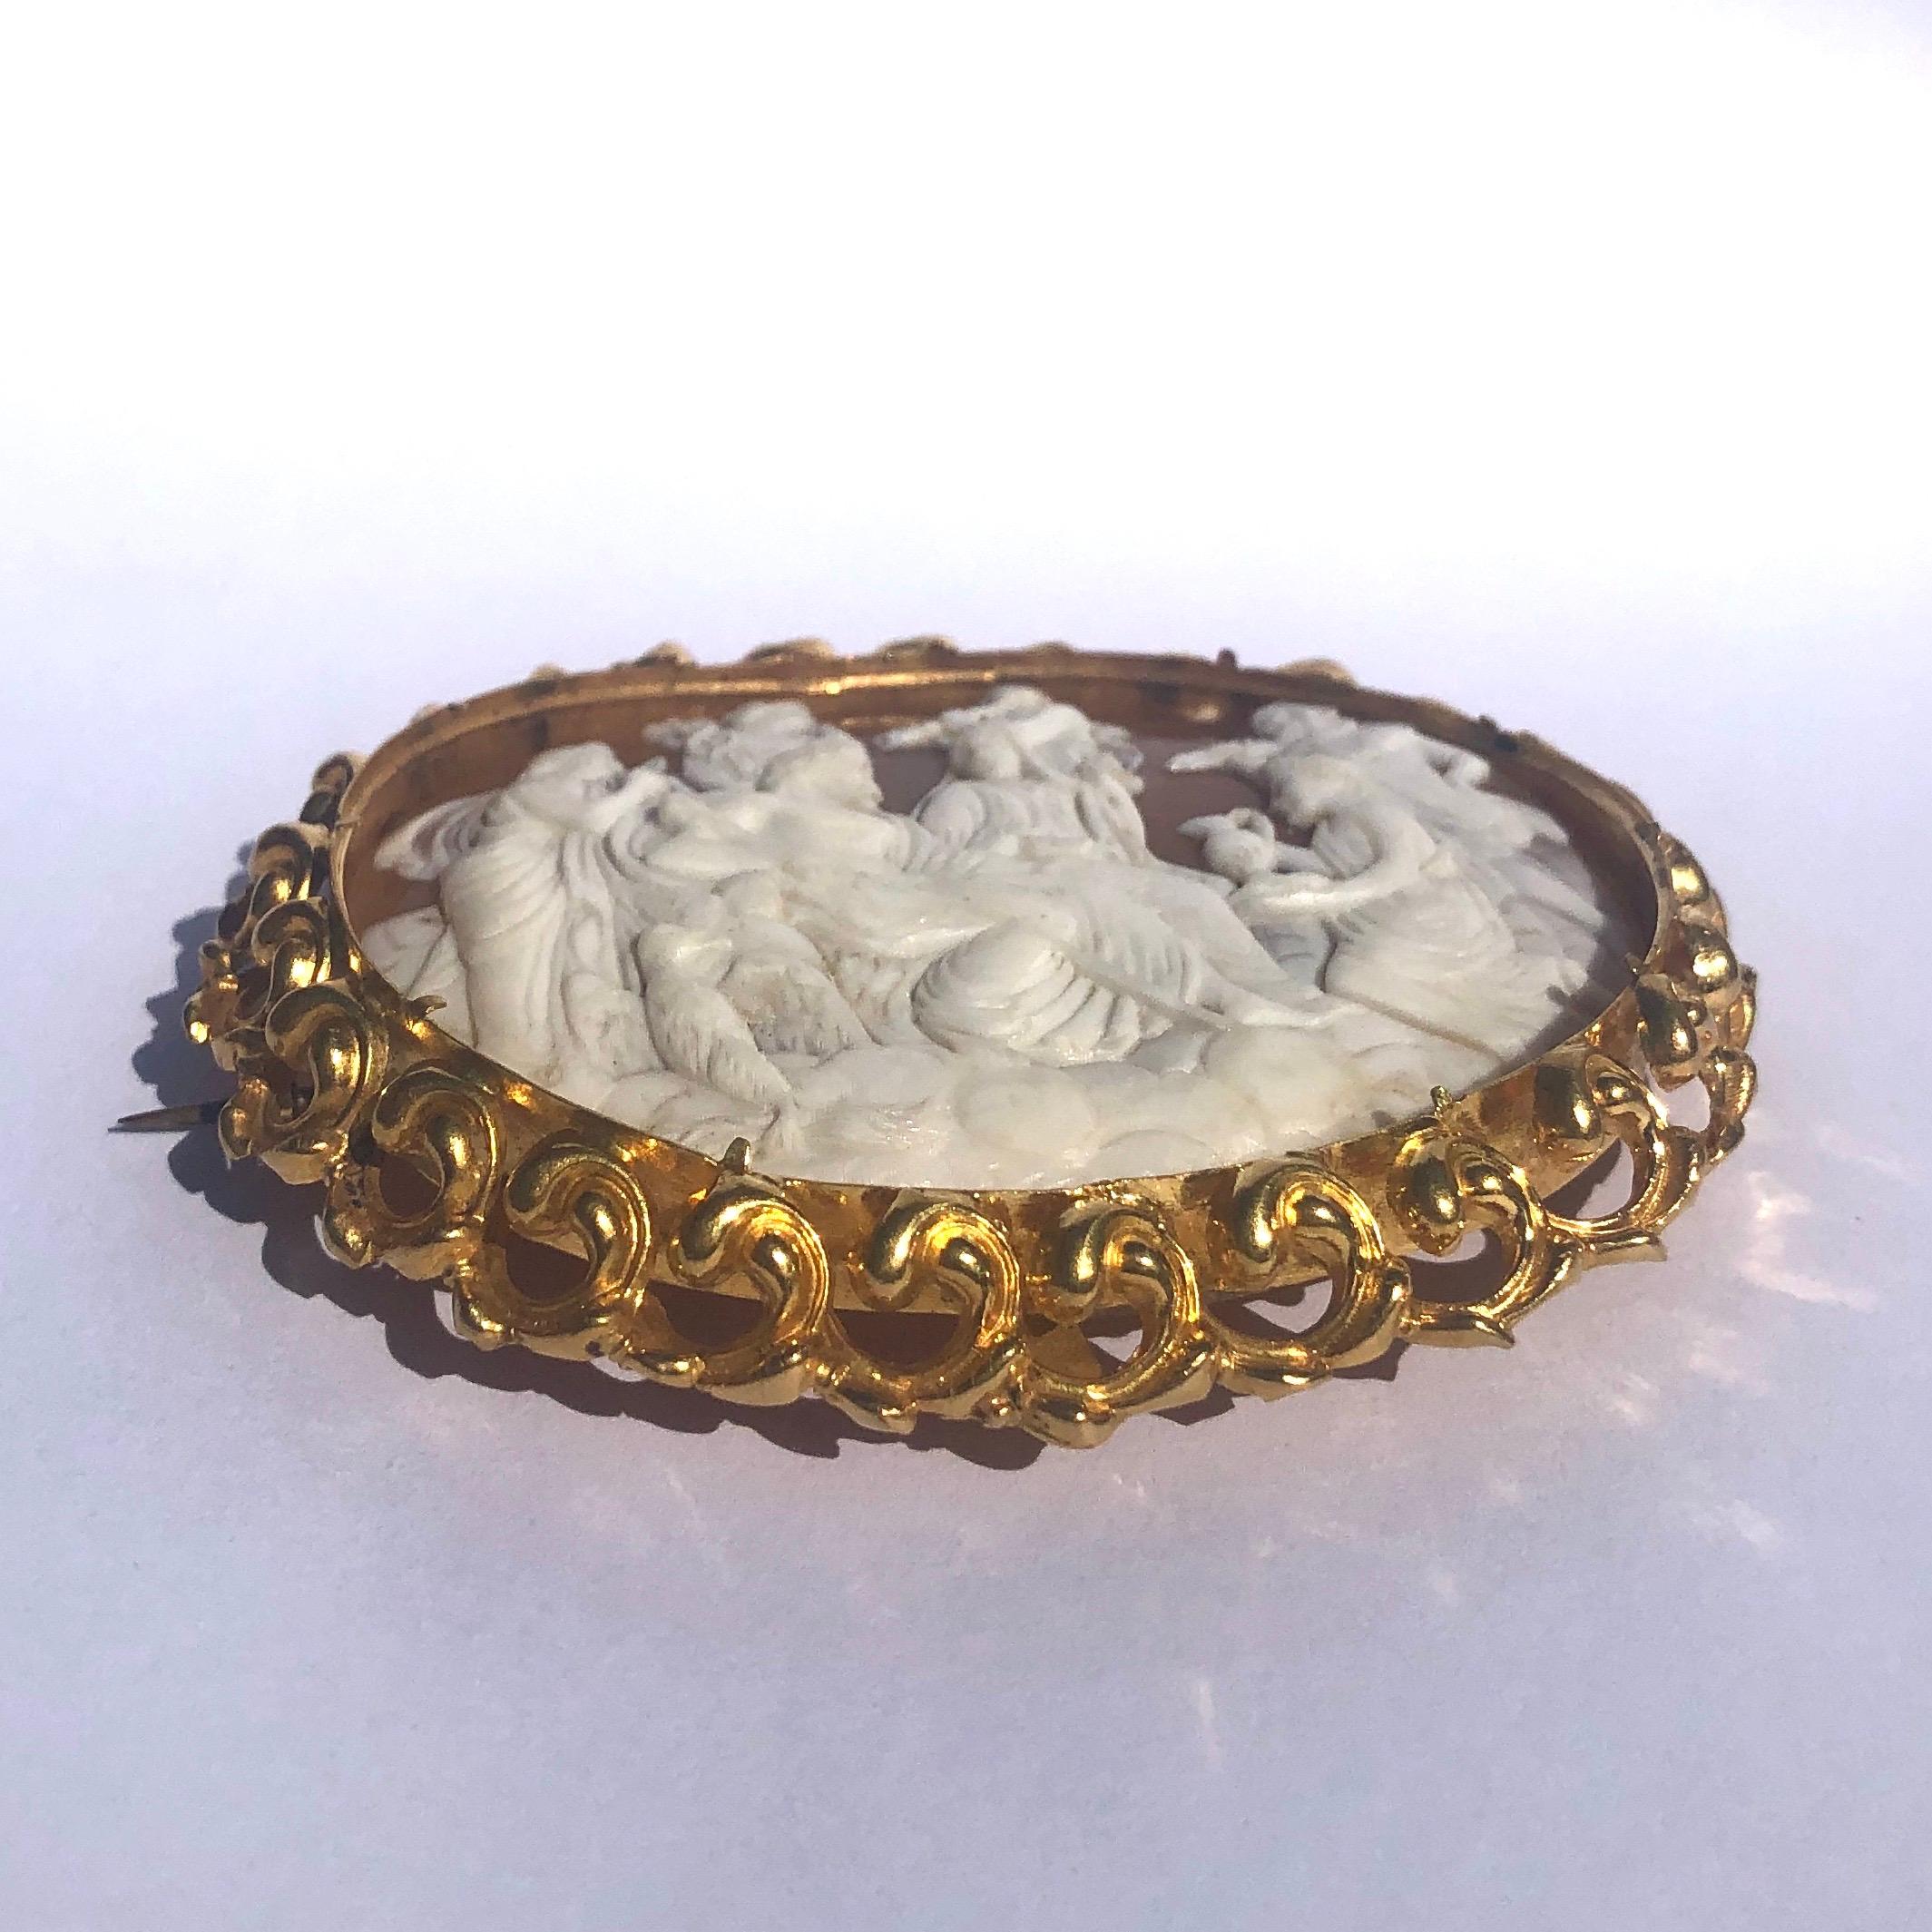 This fabulous extra large cameo brooch is made out of carved shell and the detail is exquisite. As you can see in the images the fine detail that is shown is absolutely stunning. The scene is framed by an ornate 15ct gold scroll detailed frame and